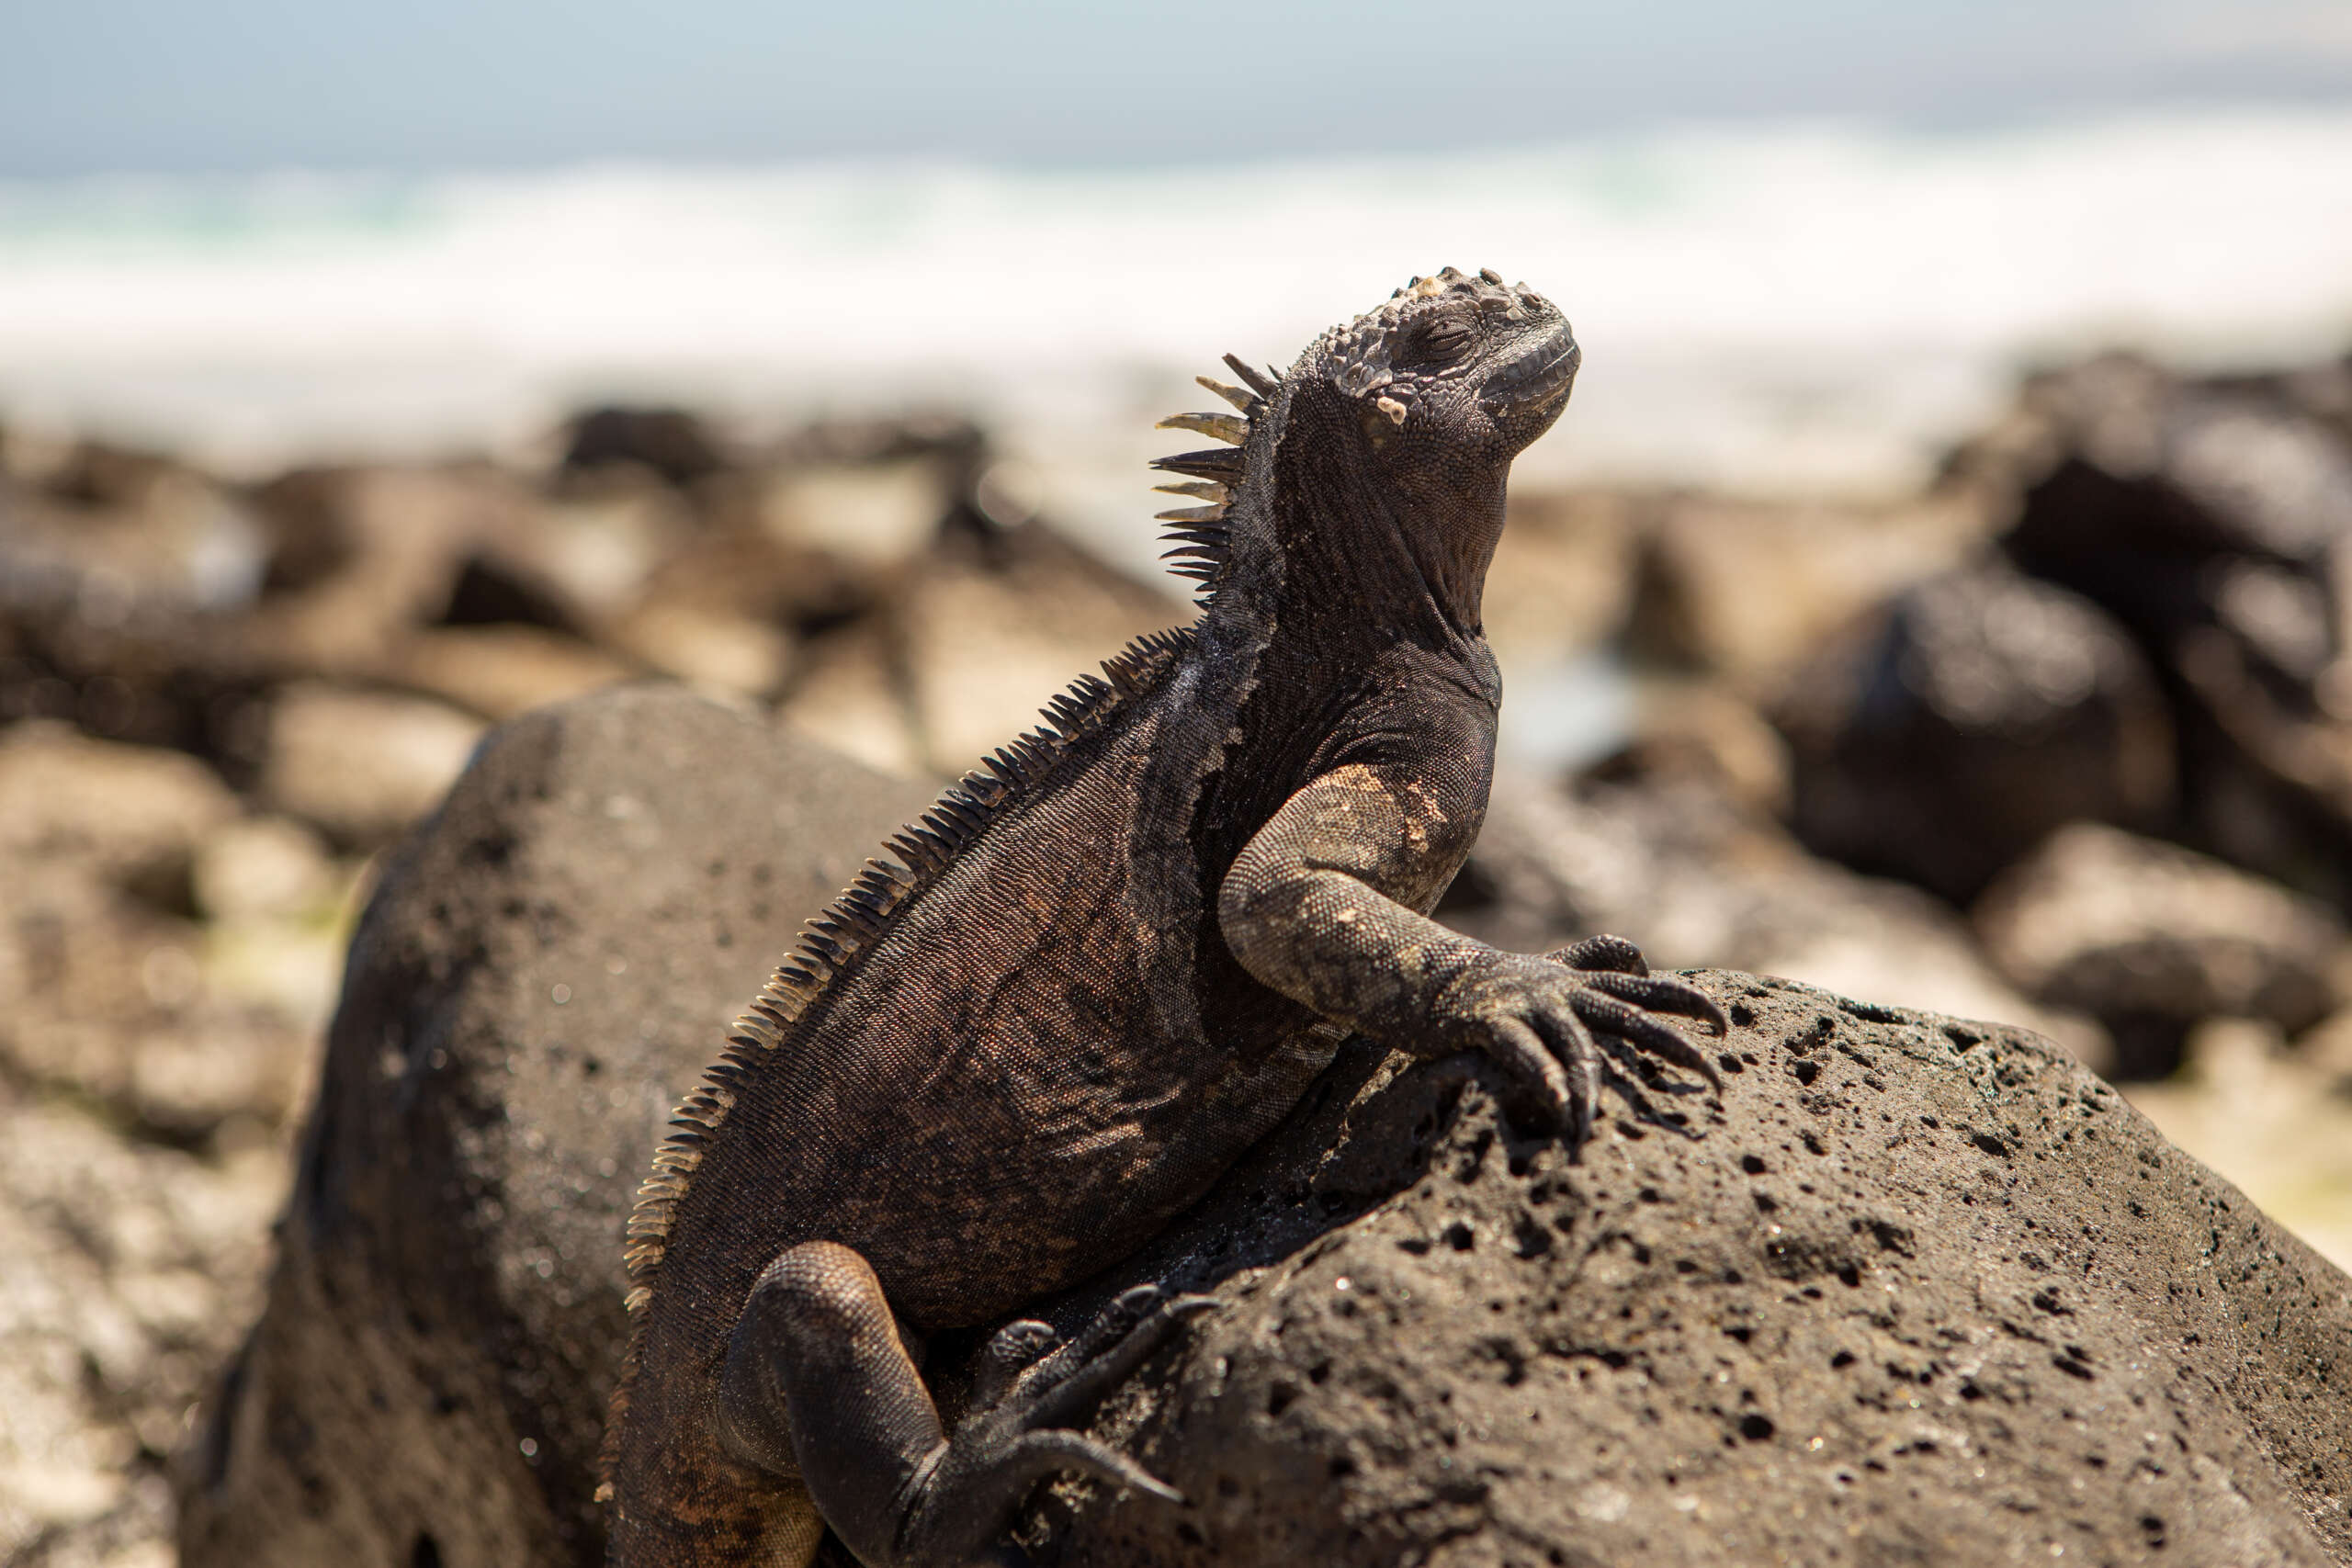 You are currently viewing Iguanas from Above